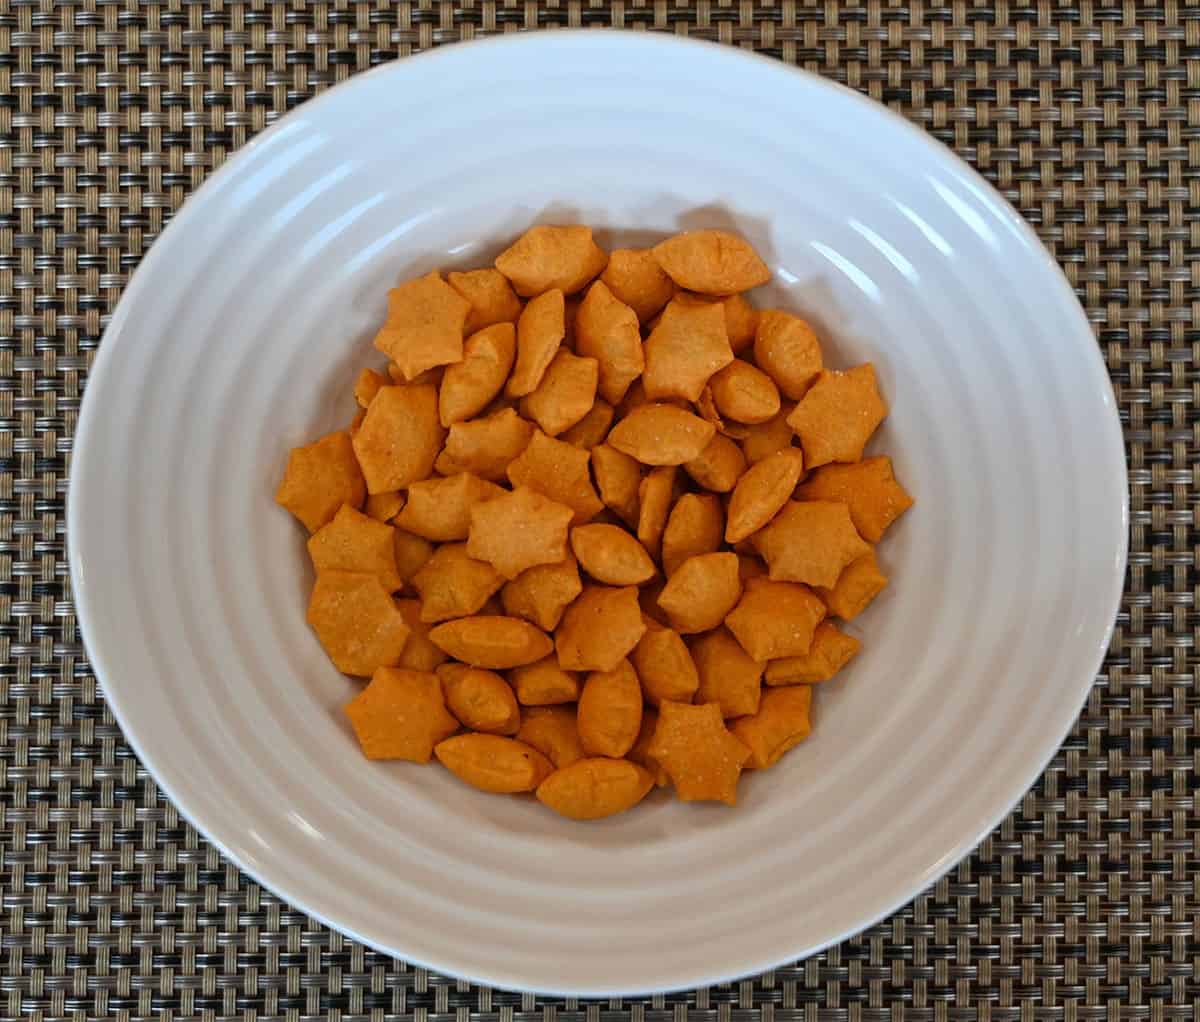 Costco MadeGood Star Puffed Crackers poured into a white bowl, top down image.  